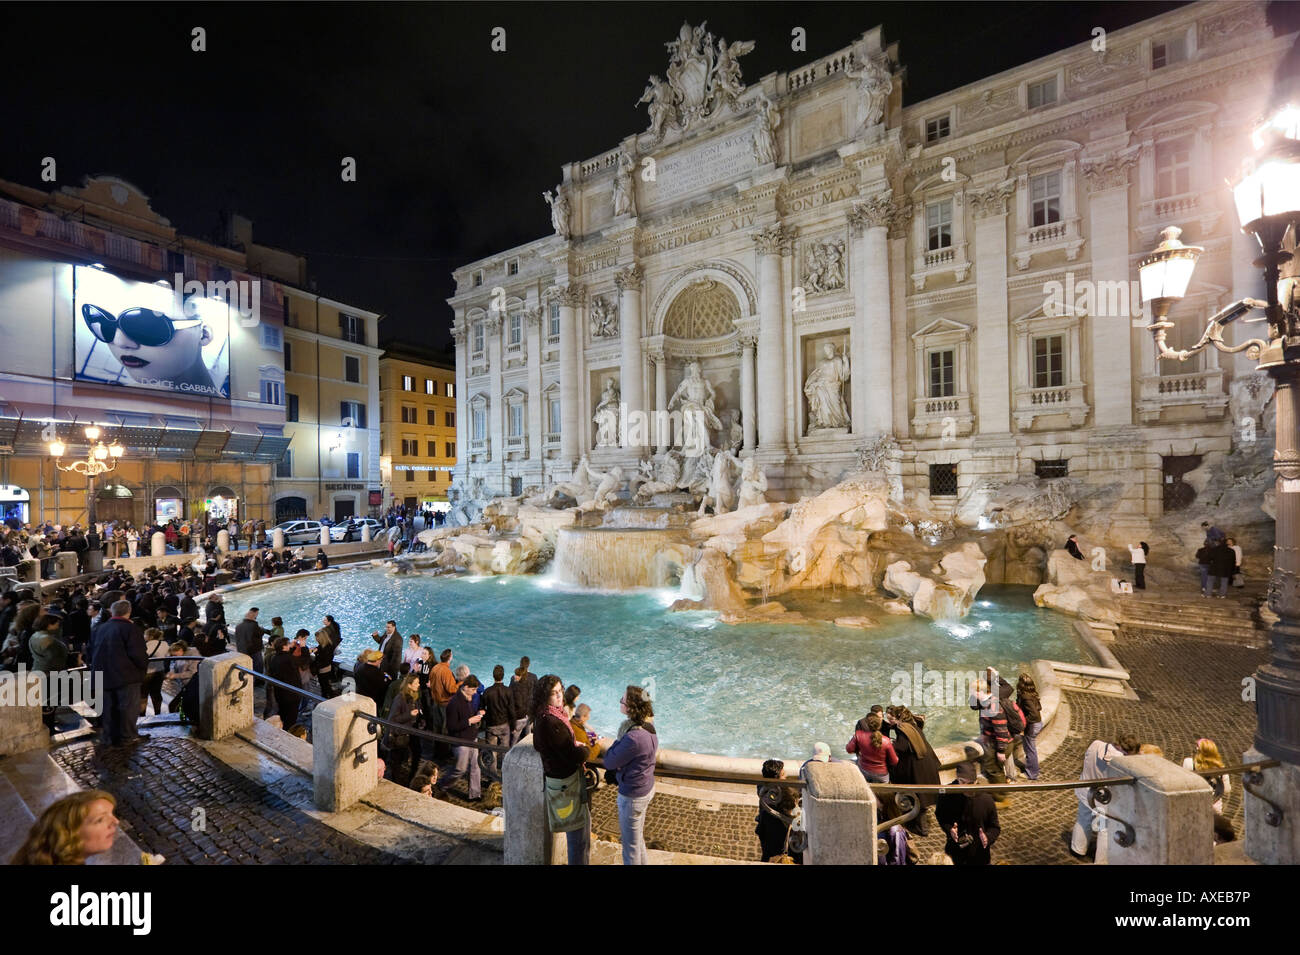 Trevi Fountain, Rome. The Trevi Fountain (or Fontana di Trevi) at night with a large Dolce Gabbana billboard to the left, Historic Centre, Rome, Italy Stock Photo